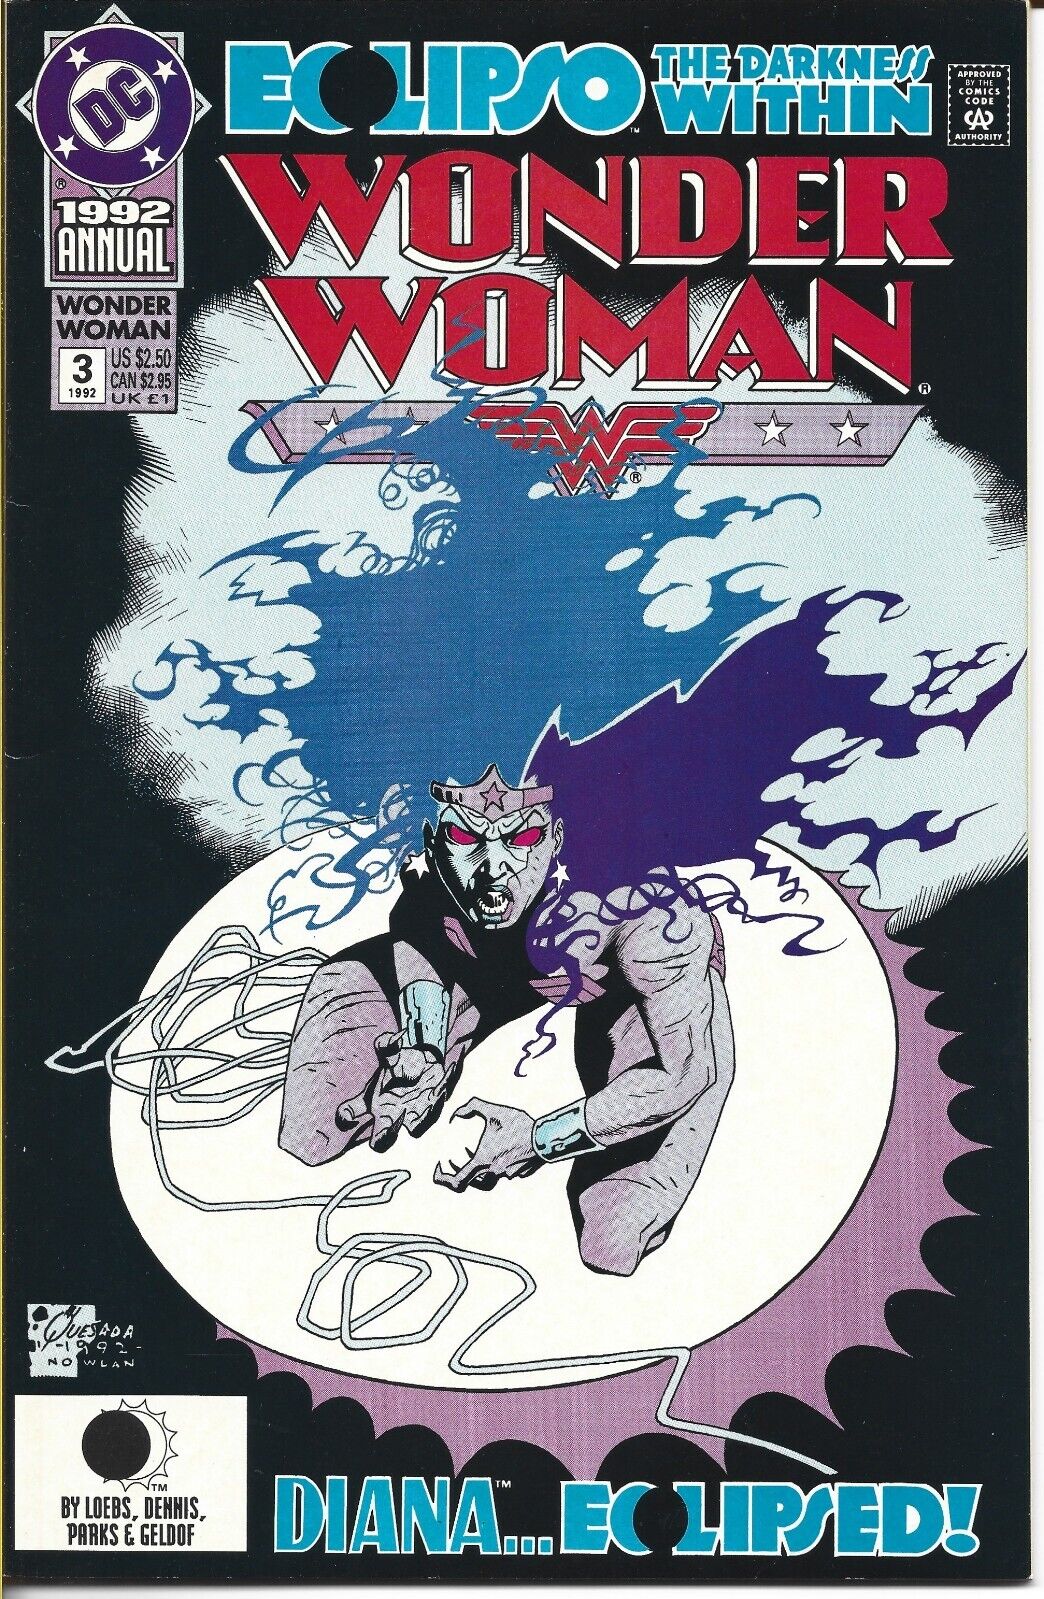 WONDER WOMAN ANNUAL #3 DC COMICS 1992 BAGGED AND BOARDED